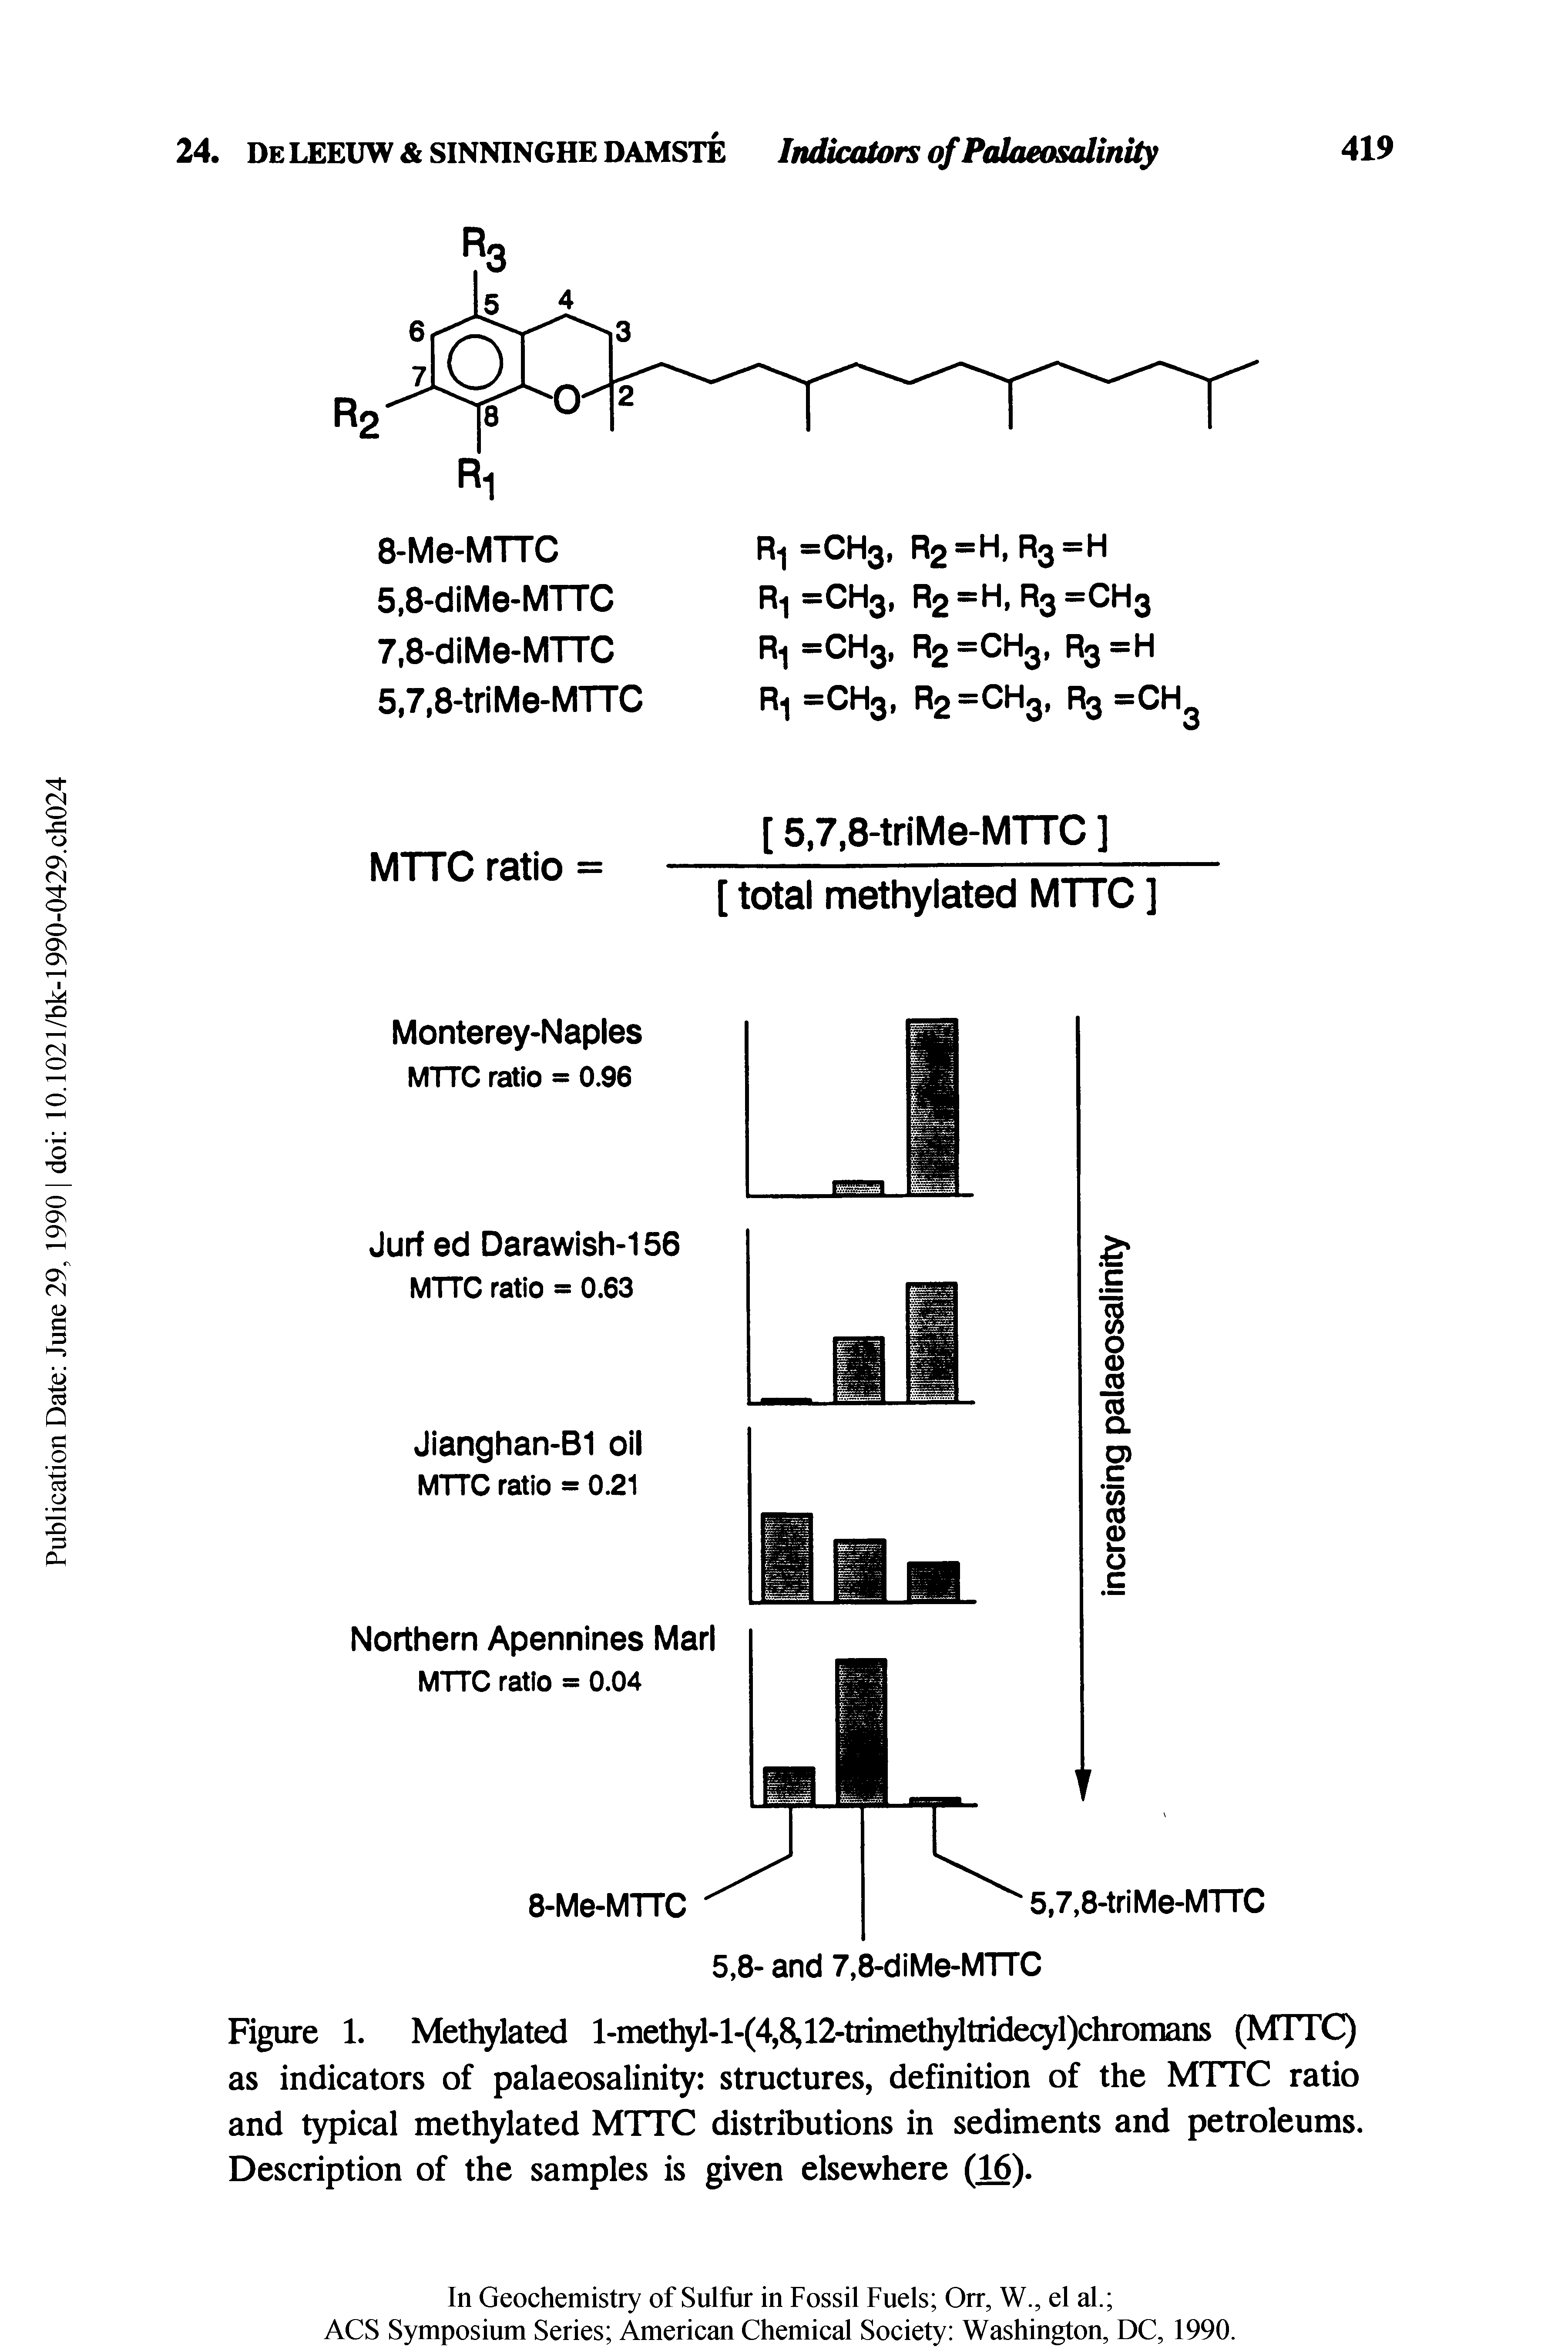 Figure 1. Methylated 1-methyl-1 -(4,8,12-trimethyl tridecyl)chromans (MTTC) as indicators of palaeosalinity structures, definition of the MTTC ratio and typical methylated MTTC distributions in sediments and petroleums. Description of the samples is given elsewhere (16).